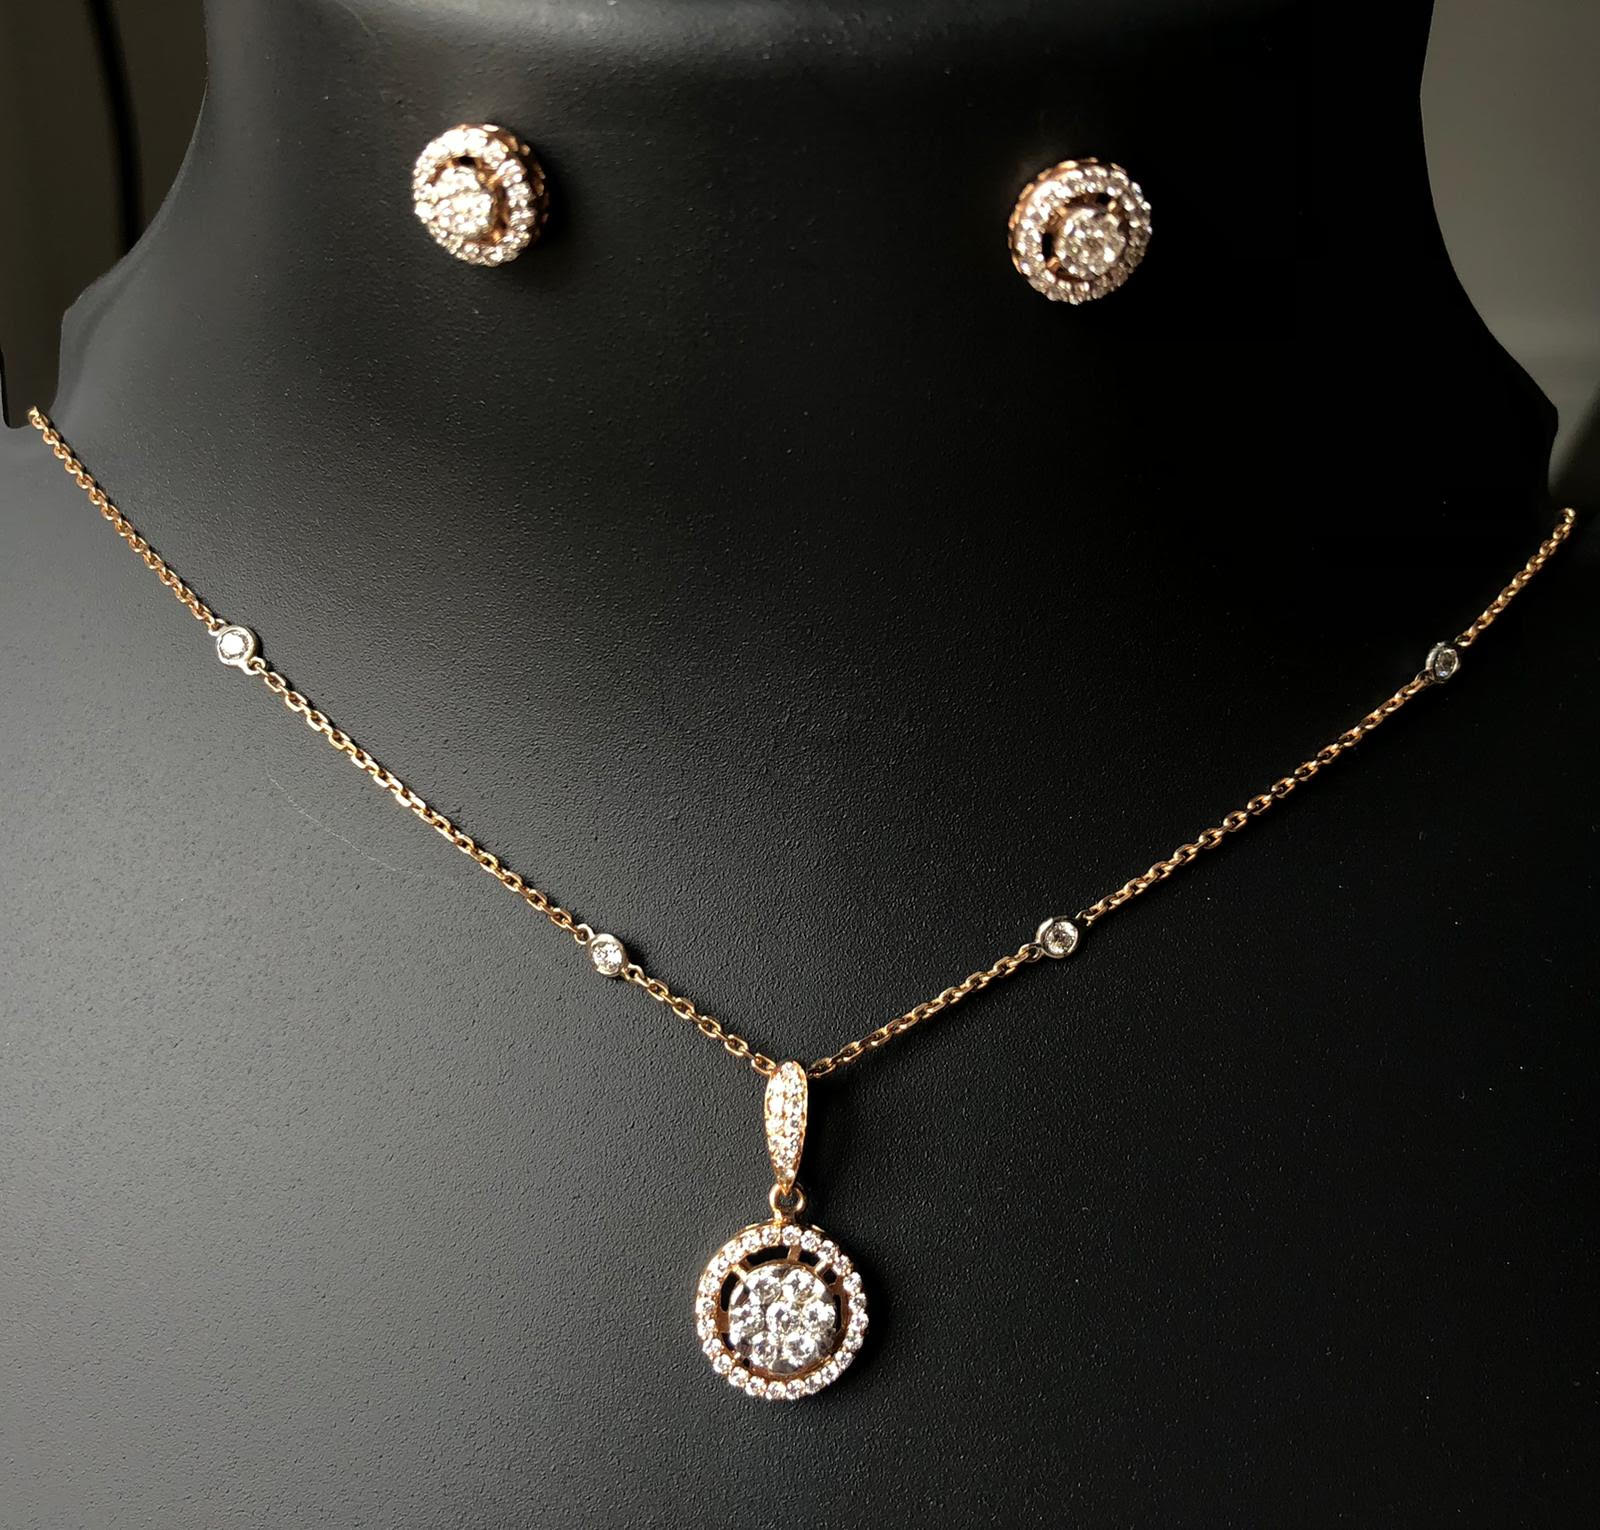 Beautiful 2.08 Carat Diamond Necklace and Earrings Set With 18k Gold - Image 5 of 12